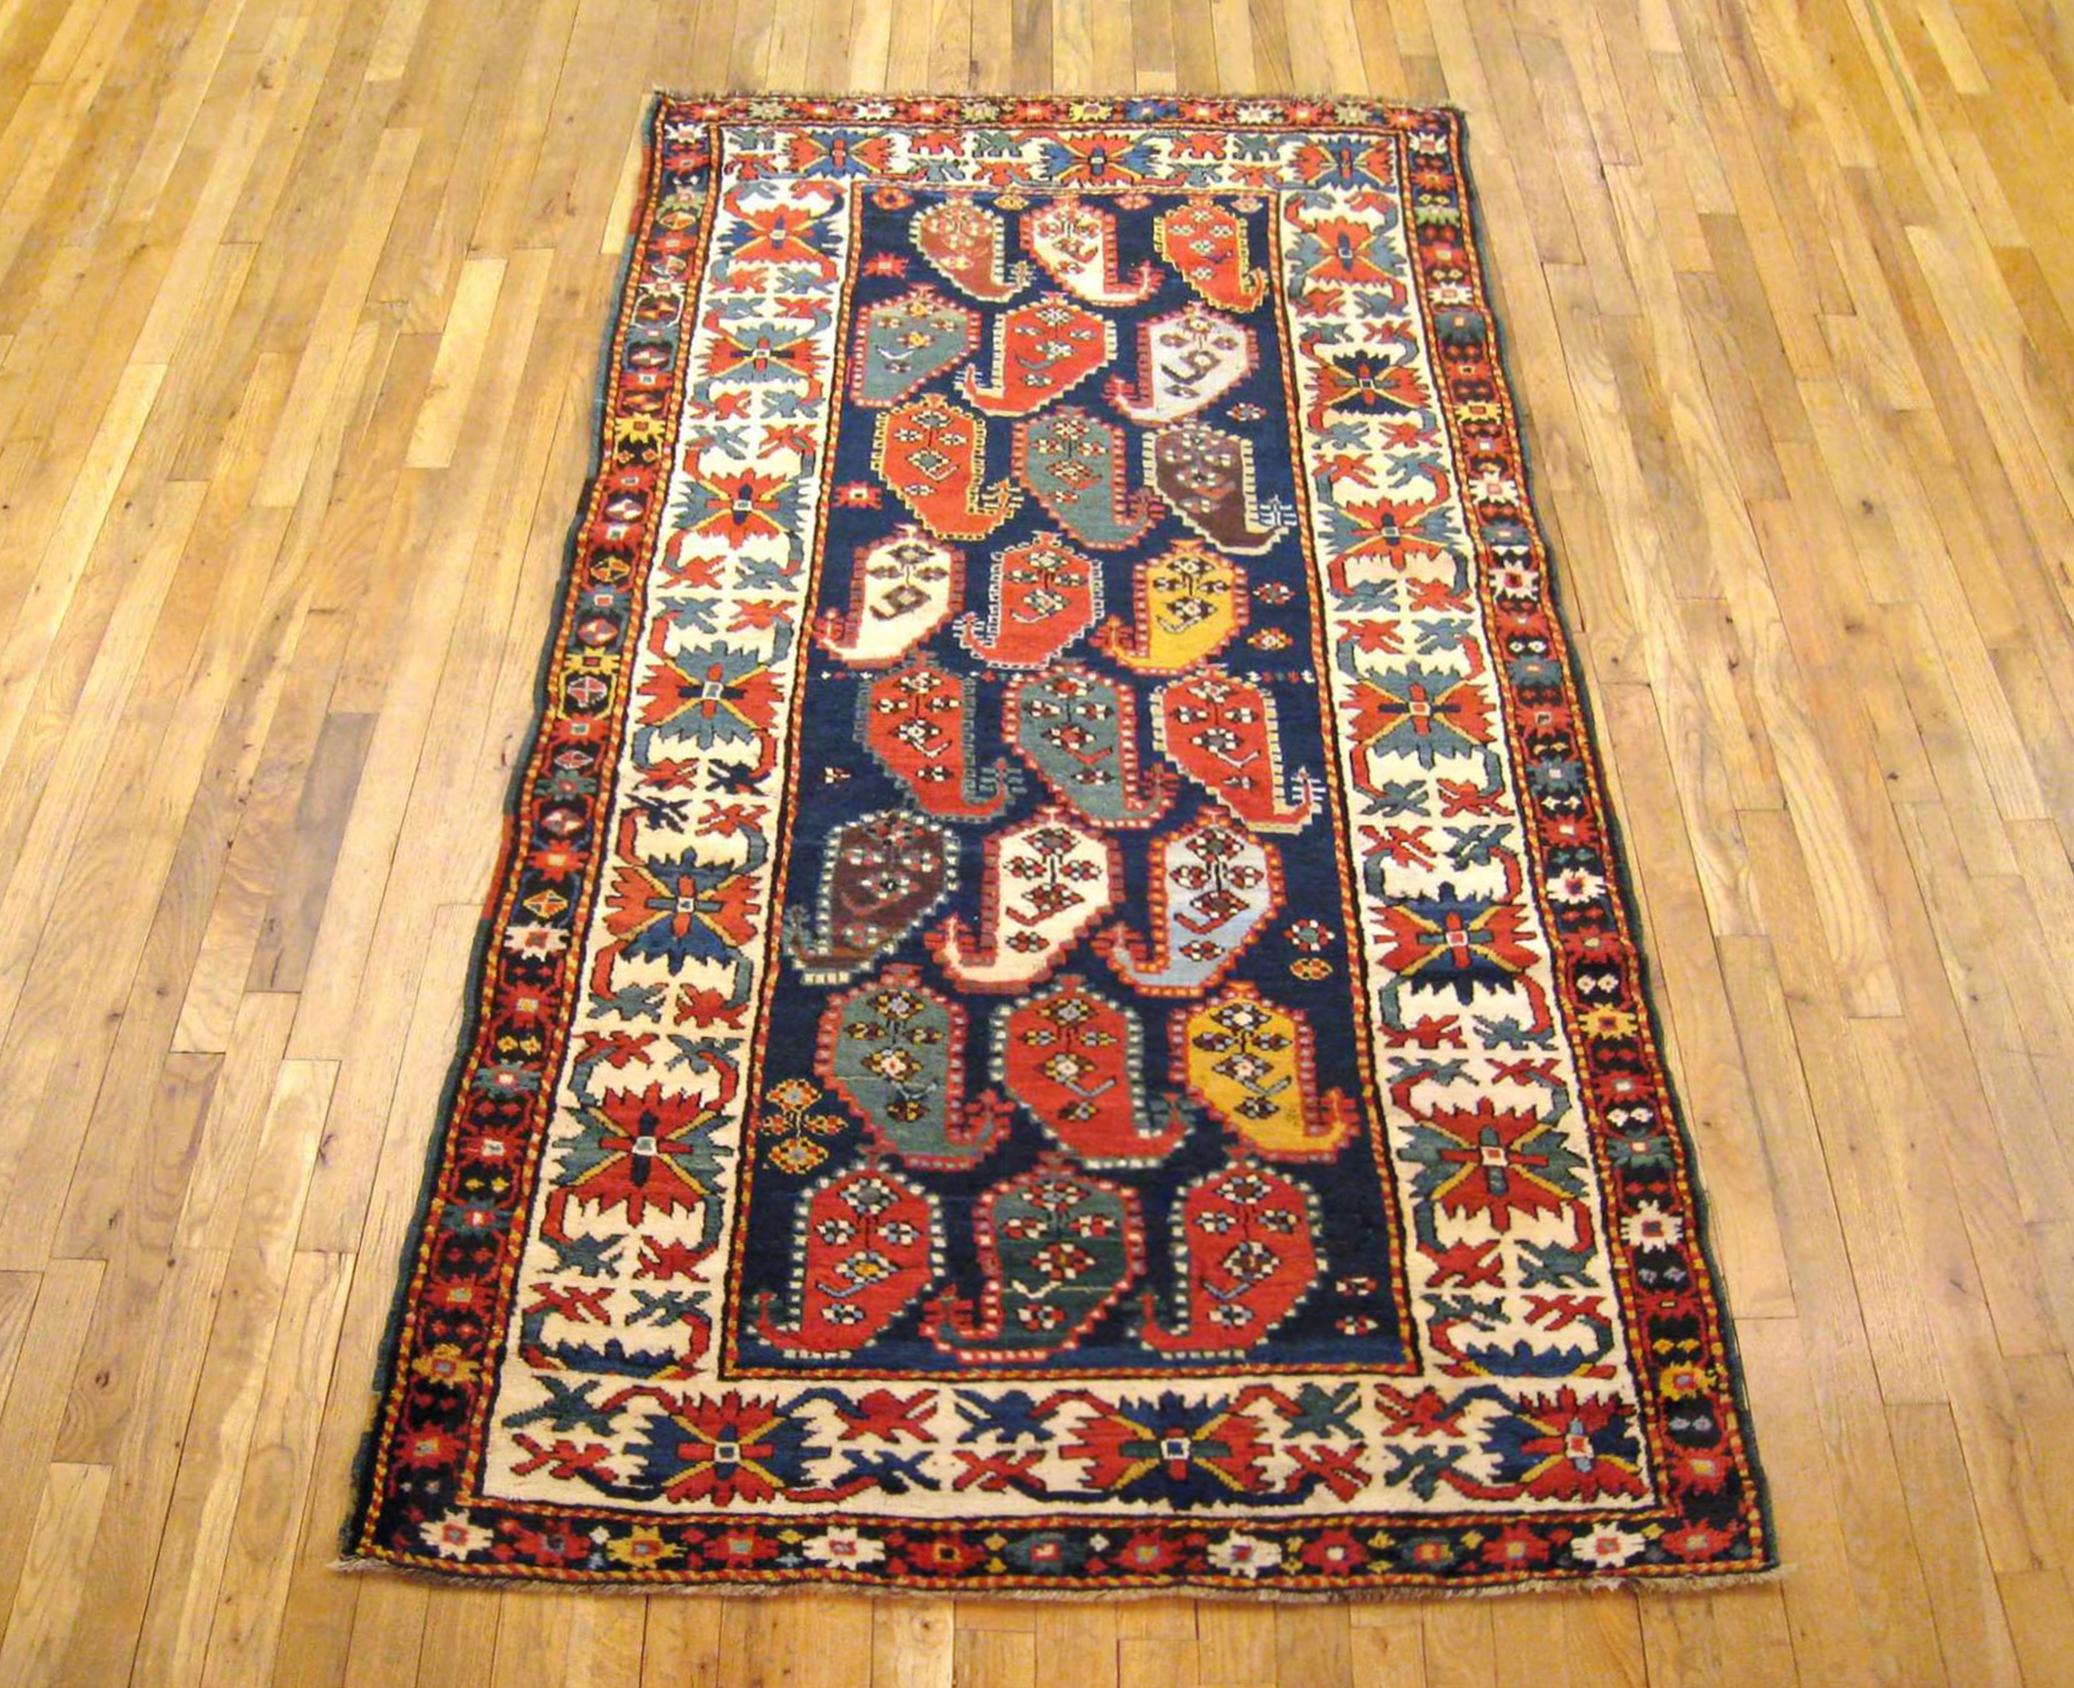 Antique Caucasian Kazak Oriental Carpet, Runner size, circa 1890.

A one-of-a-kind antique Caucasian Kazak Oriental Carpet, hand-knotted with soft wool pile. This lovely hand-knotted wool rug features a Paisley design allover the blue central